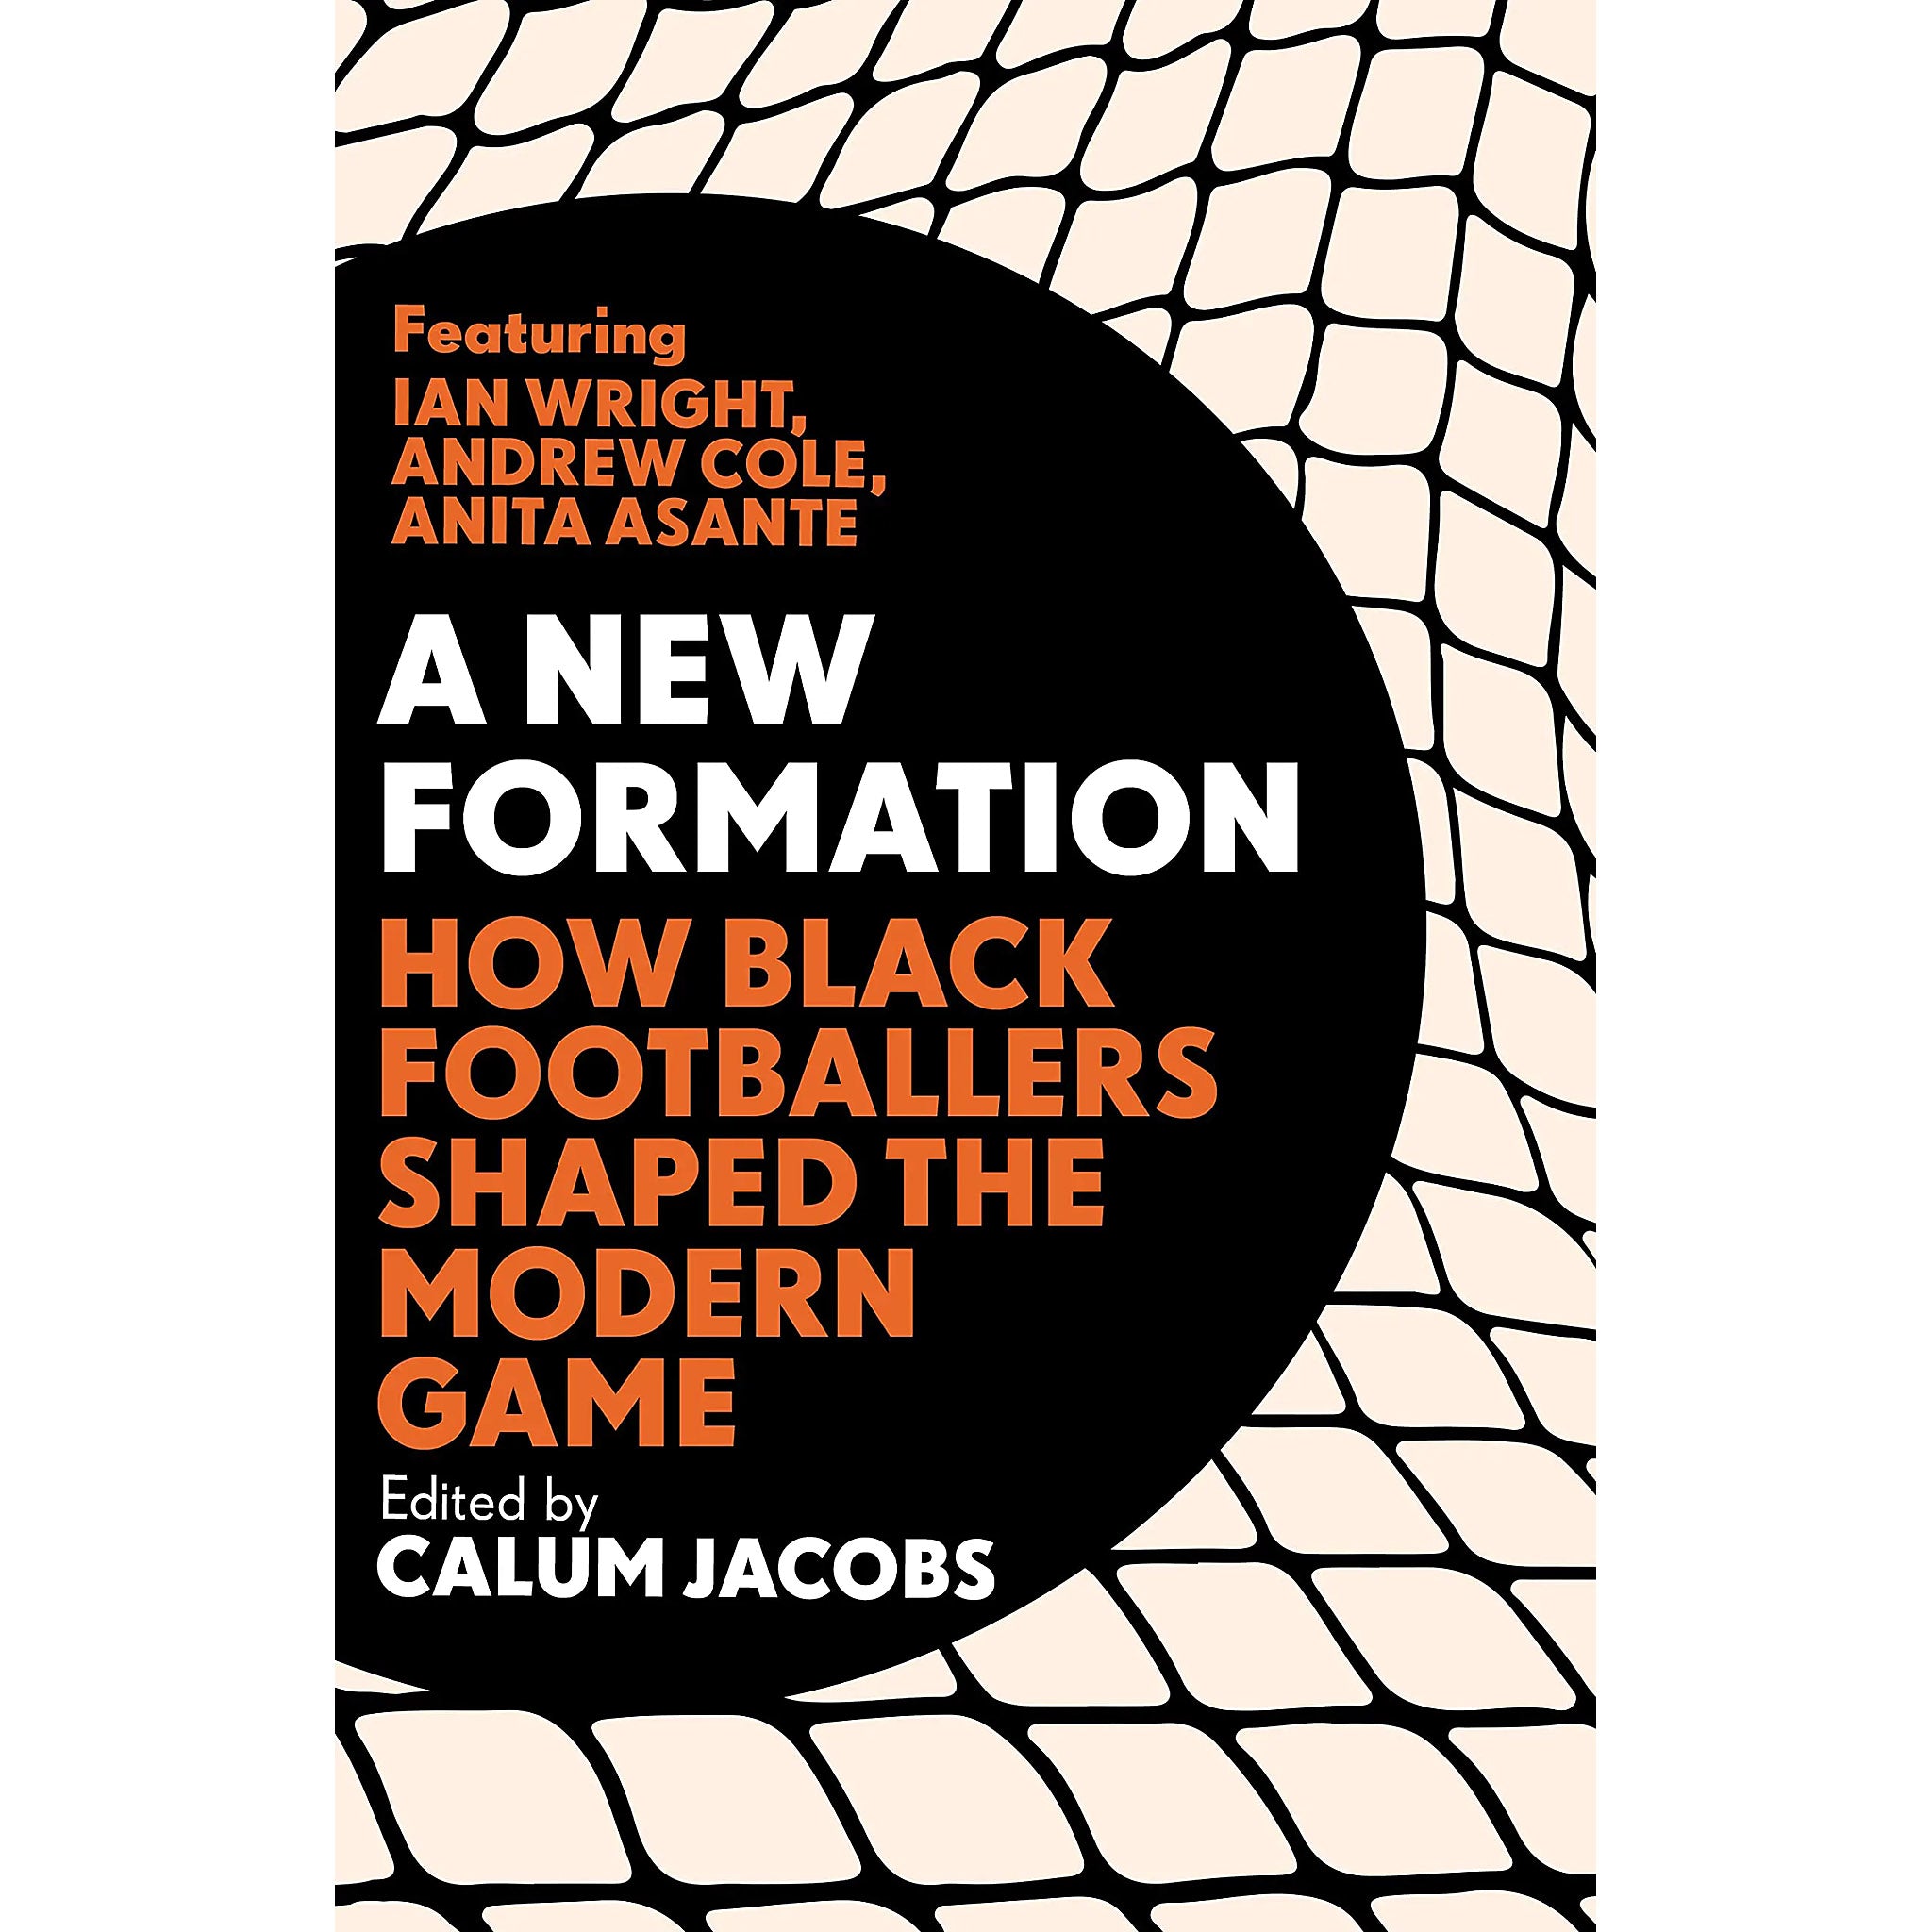 A New Formation – How Black Footballers Shaped the Modern Game